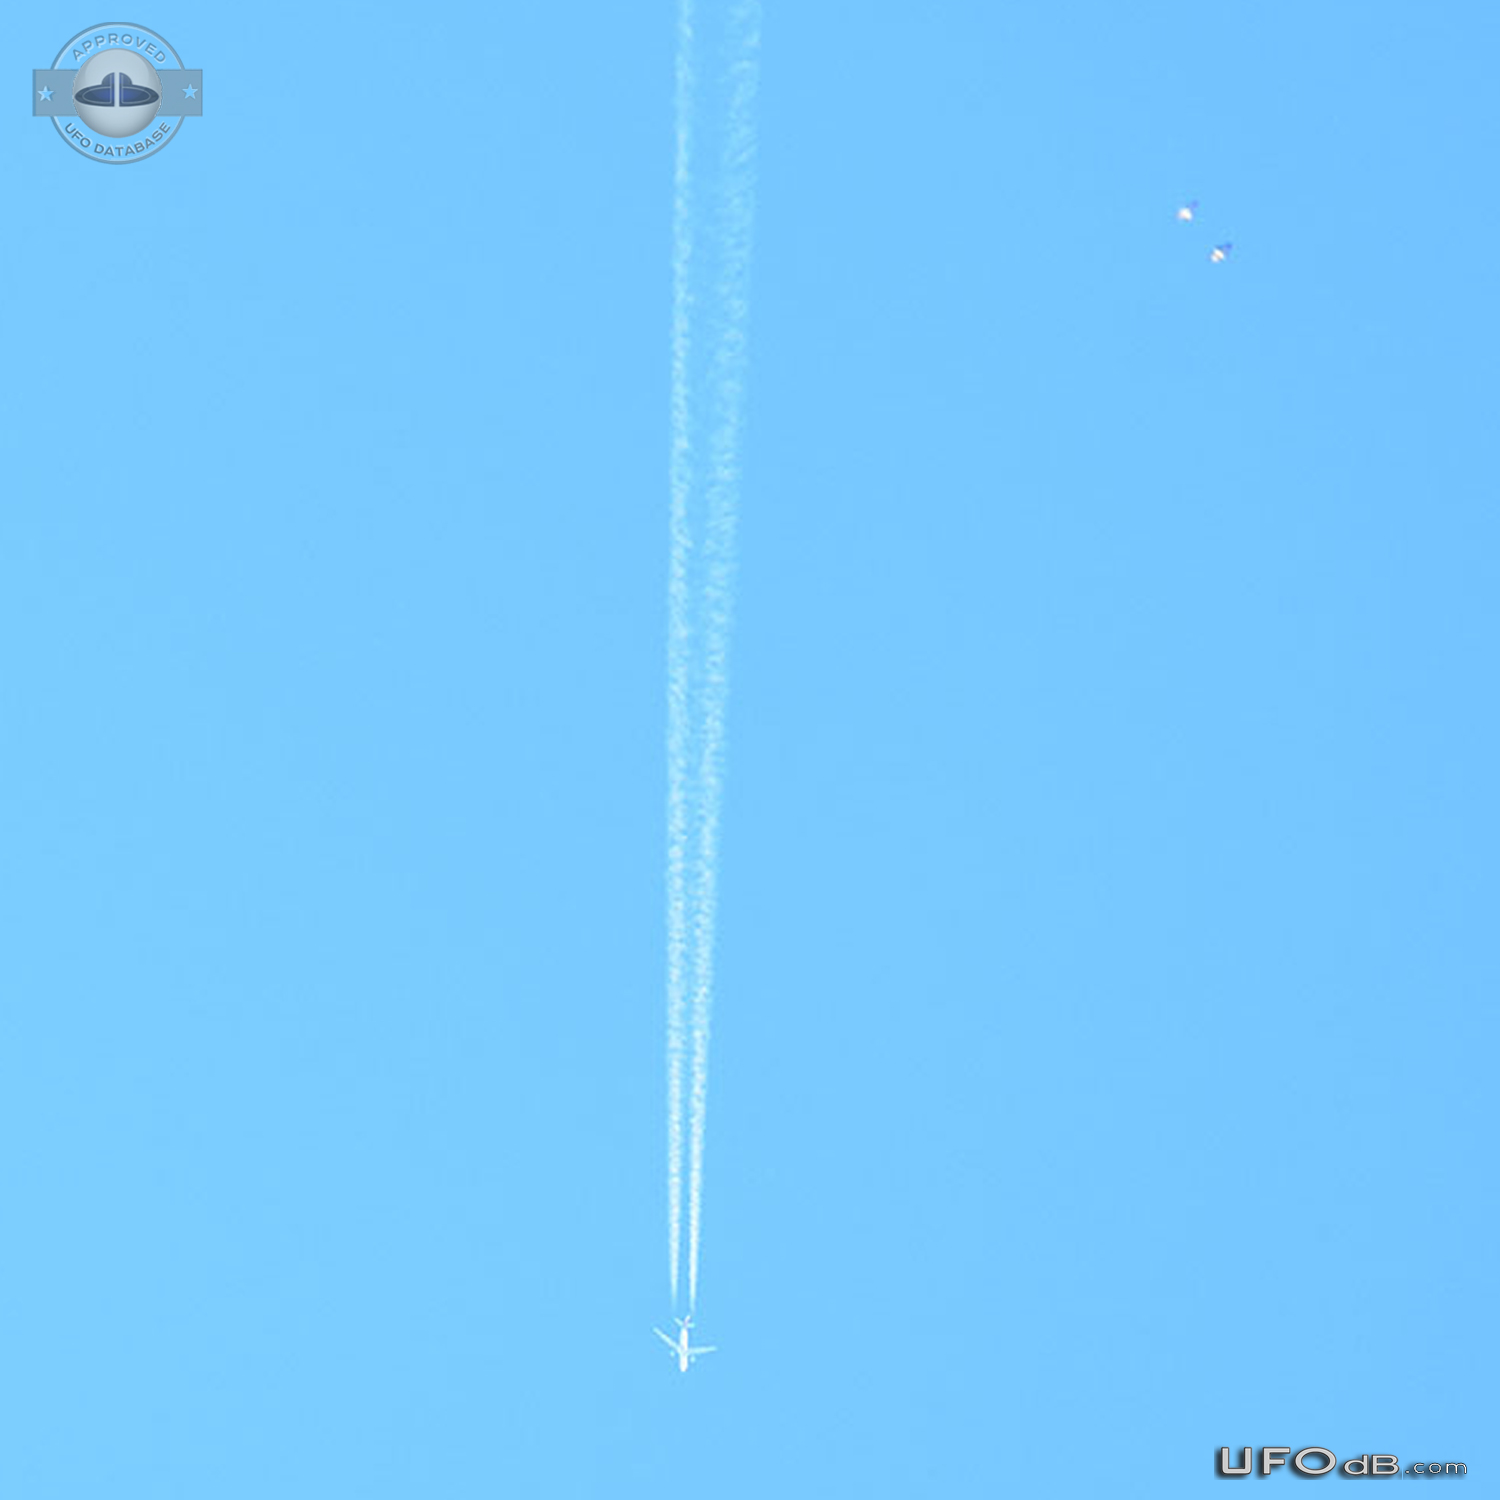 I was Capturing Flying Boeing Jet Images From My Cam Sri Lanka 2015 UFO Picture #727-2